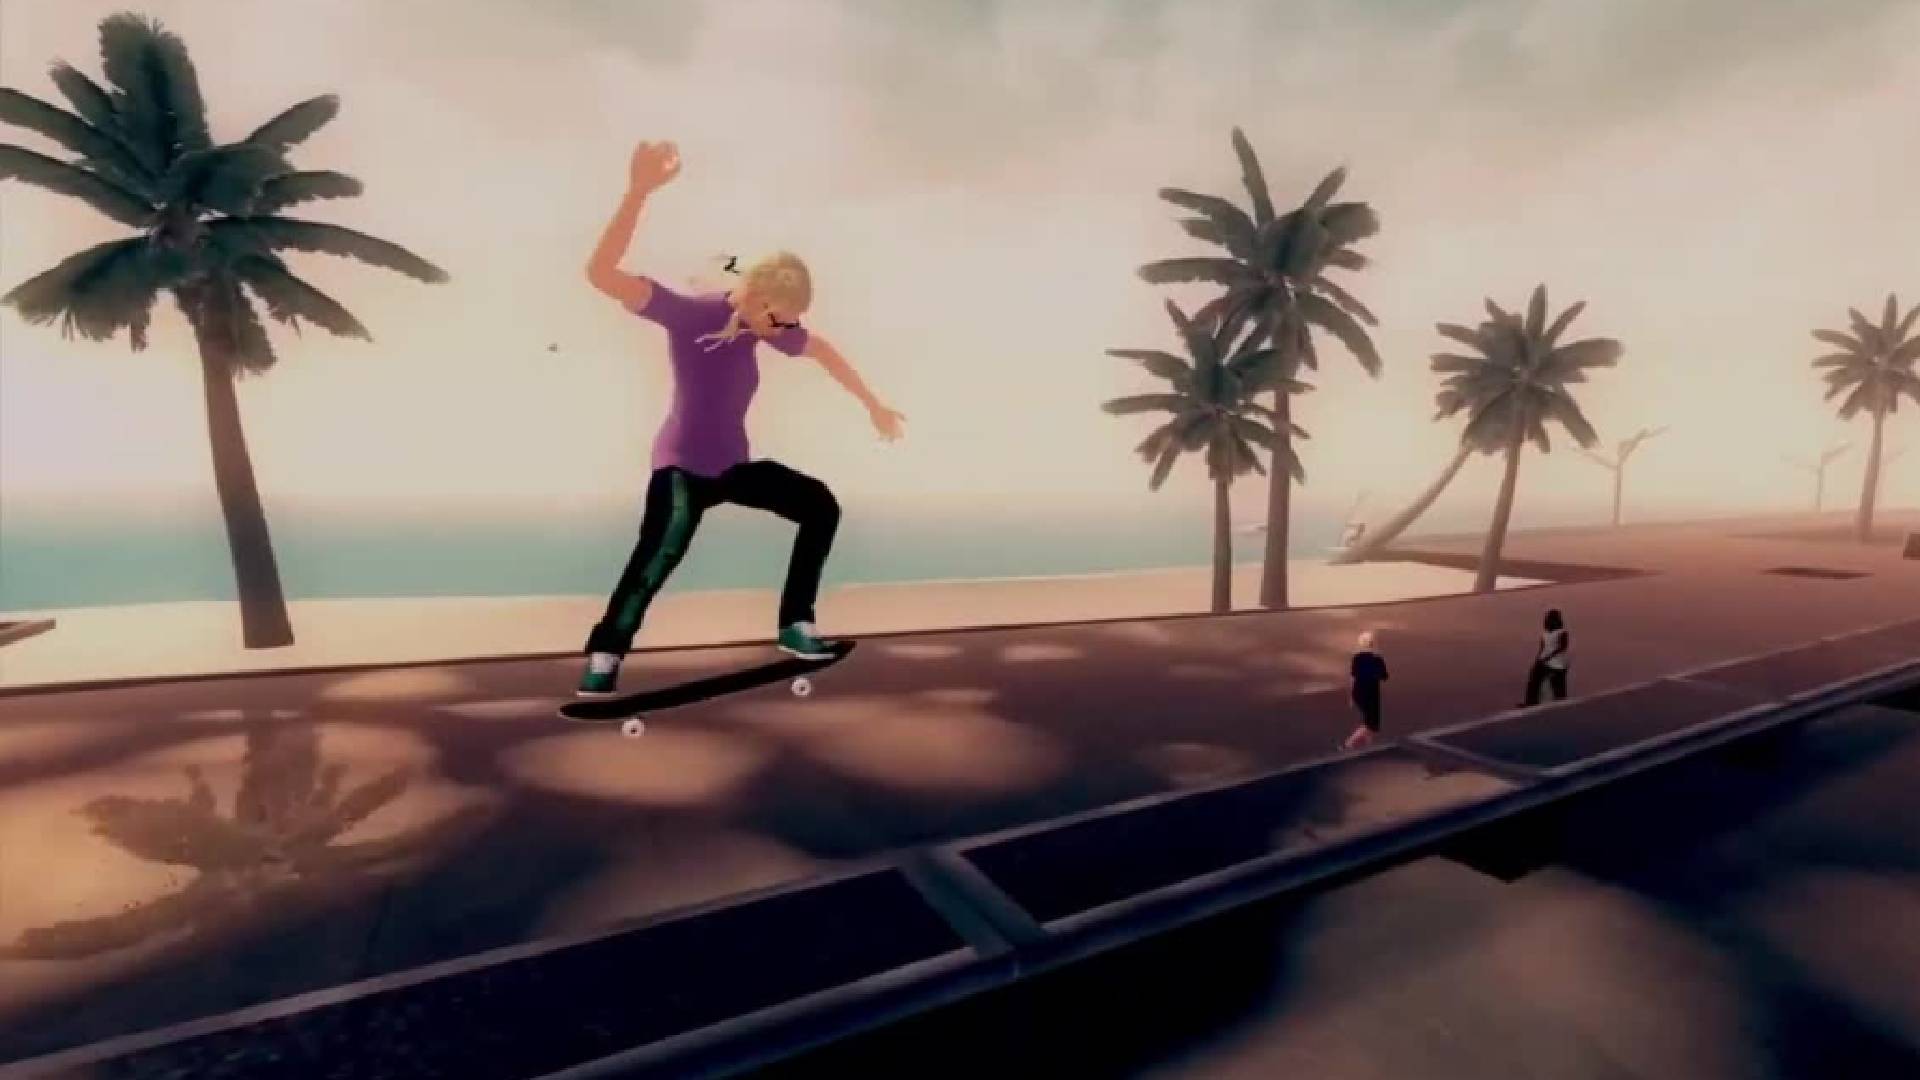 The best skateboarding games of all time